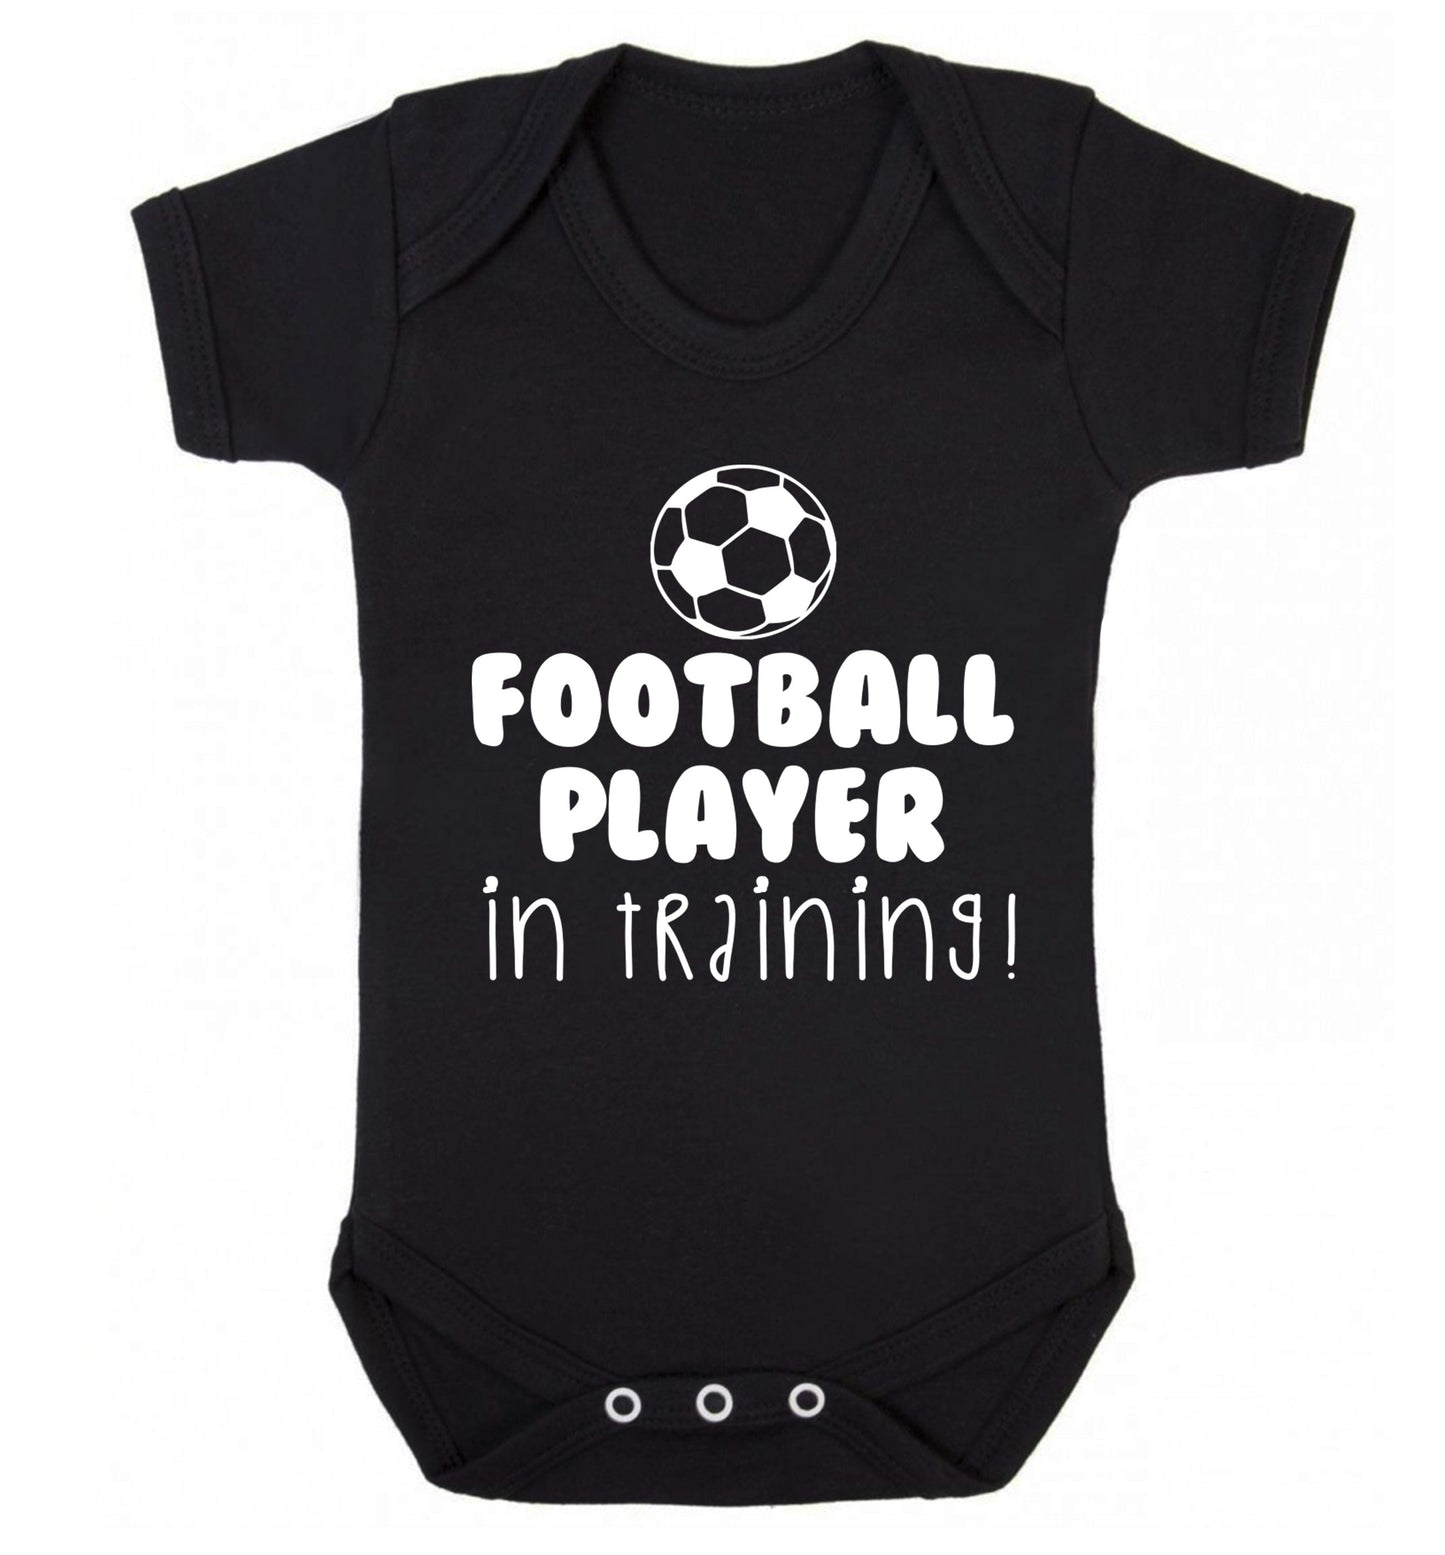 Football player in training Baby Vest black 18-24 months